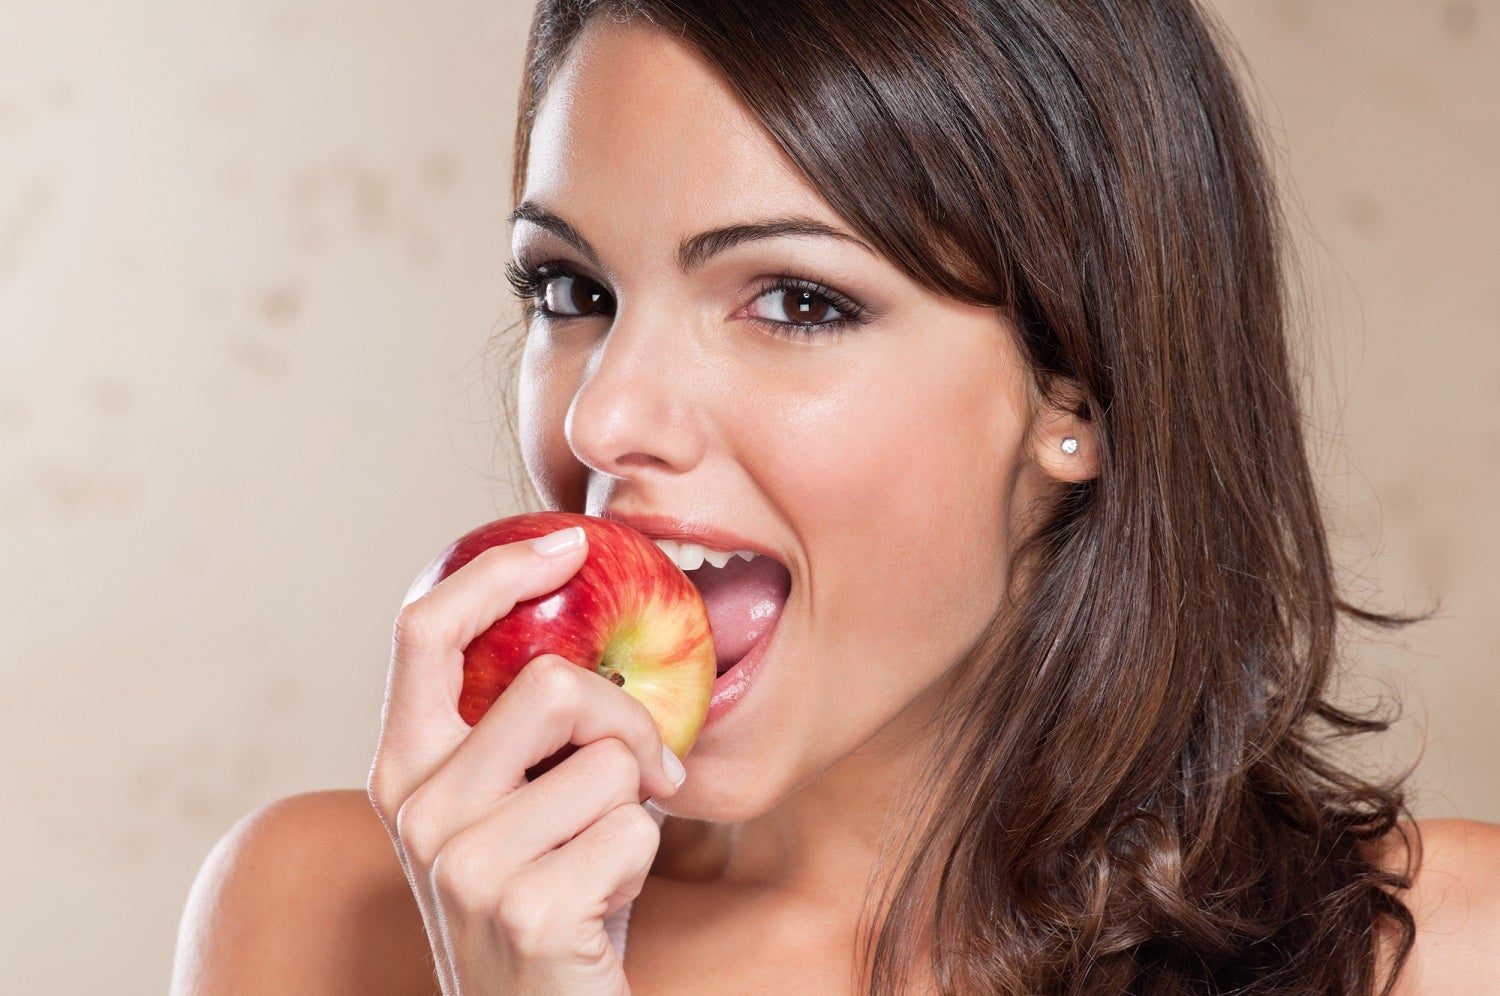 Person with long brown hair and white skin eating ripe red and yellow apple